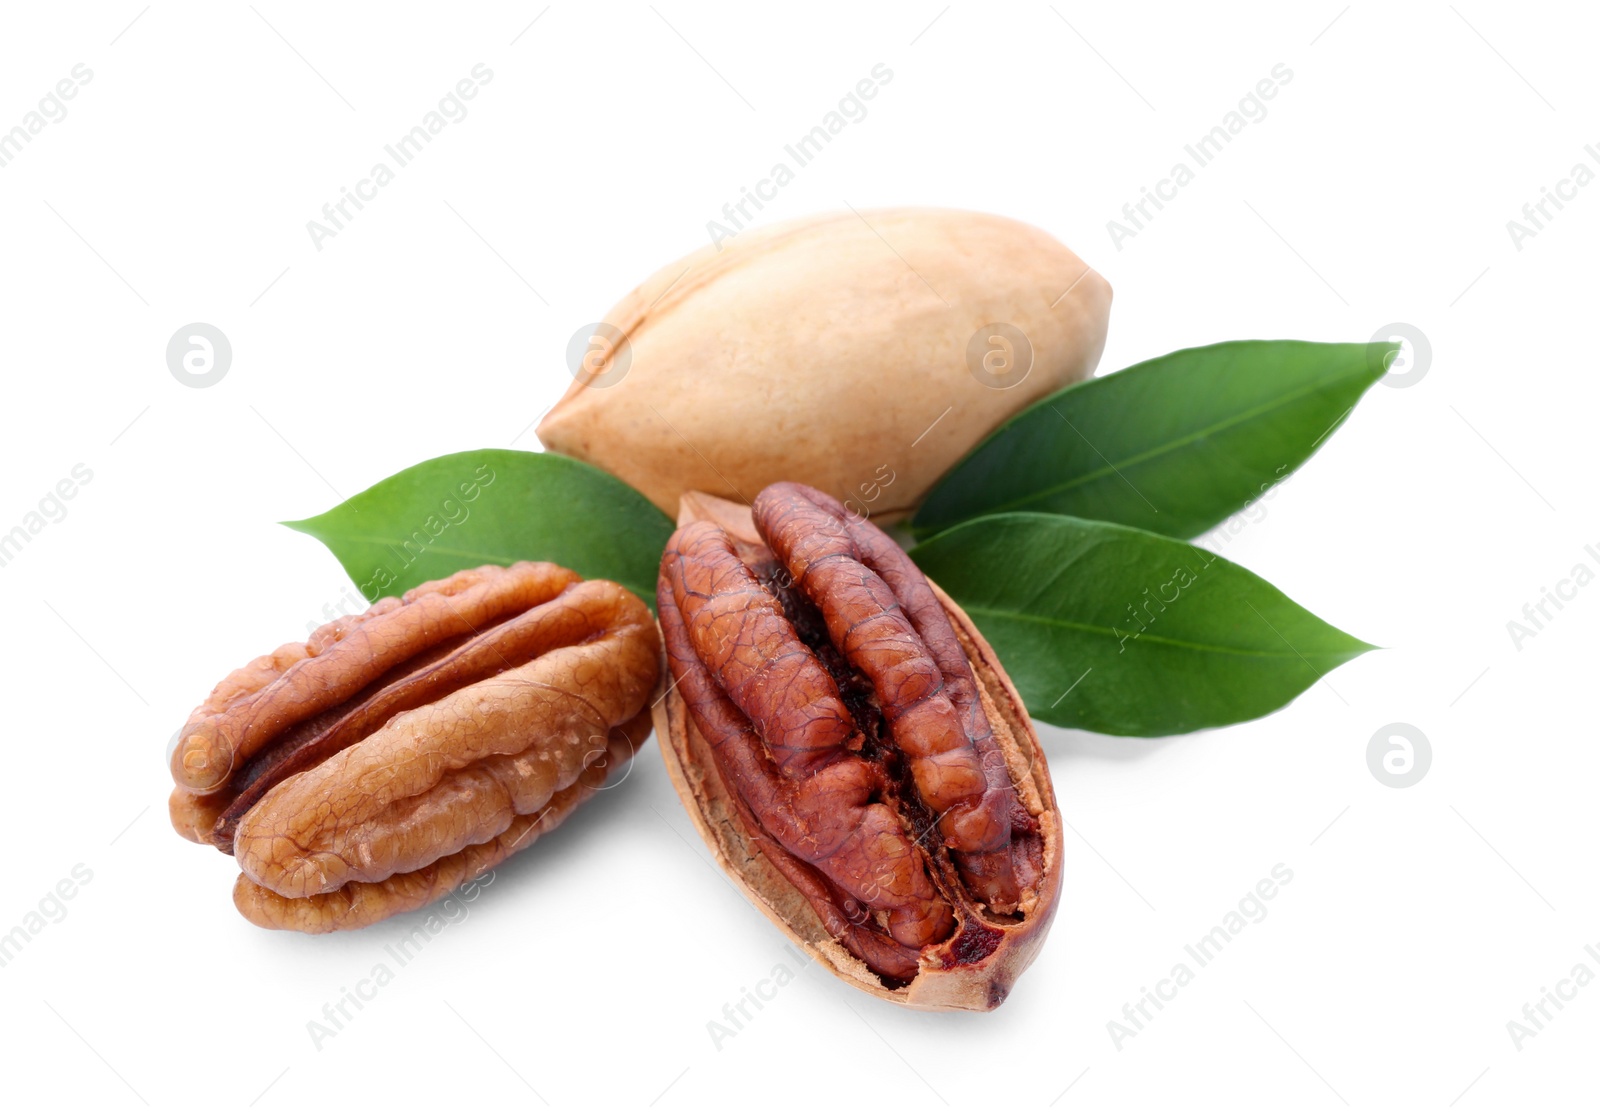 Photo of Pecan nuts and leaves on white background